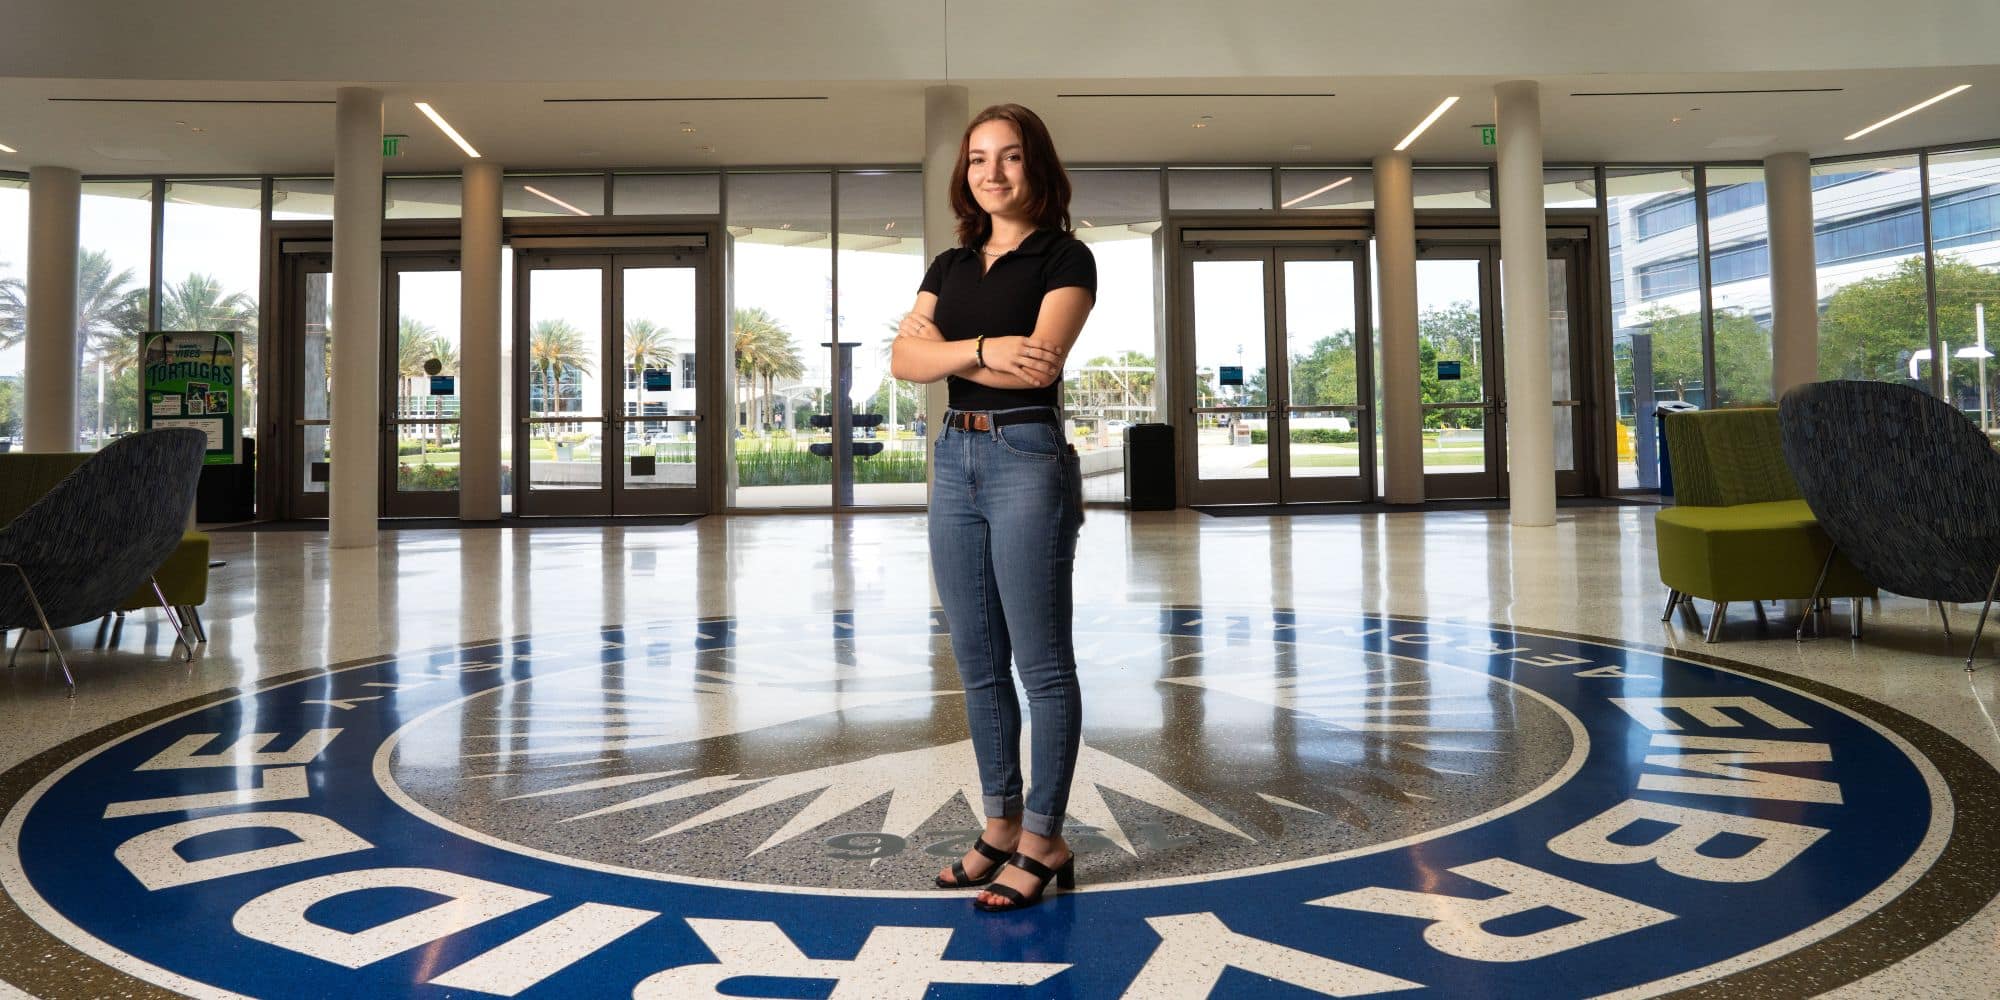 Catie Alfonzo-Jenner in the Mori Hosseini Student Union on Embry-Riddle's Daytona Beach Campus. (Photo: Embry-Riddle / Bill Fredette-Huffman)